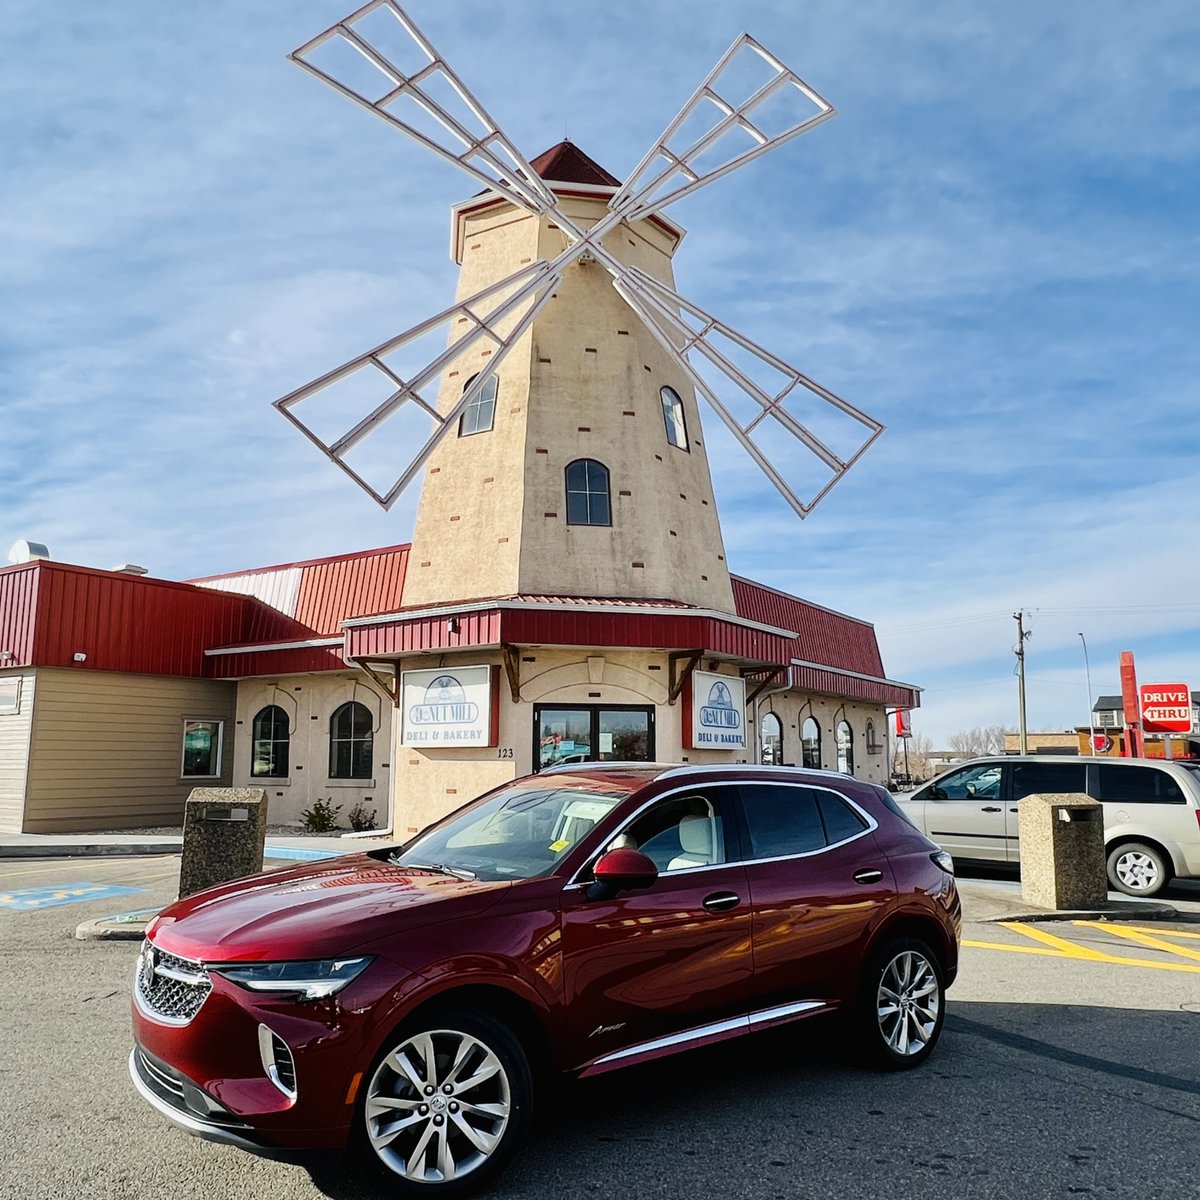 While travelling between Calgary & Edmonton in your new vehicle purchased from Capital Chevrolet, be sure to stop by The Donut Mill. 🍩 Located on Gasoline Alley, you can't go wrong with all the tasty treats they have to offer. 😋 #LocalHotSpot